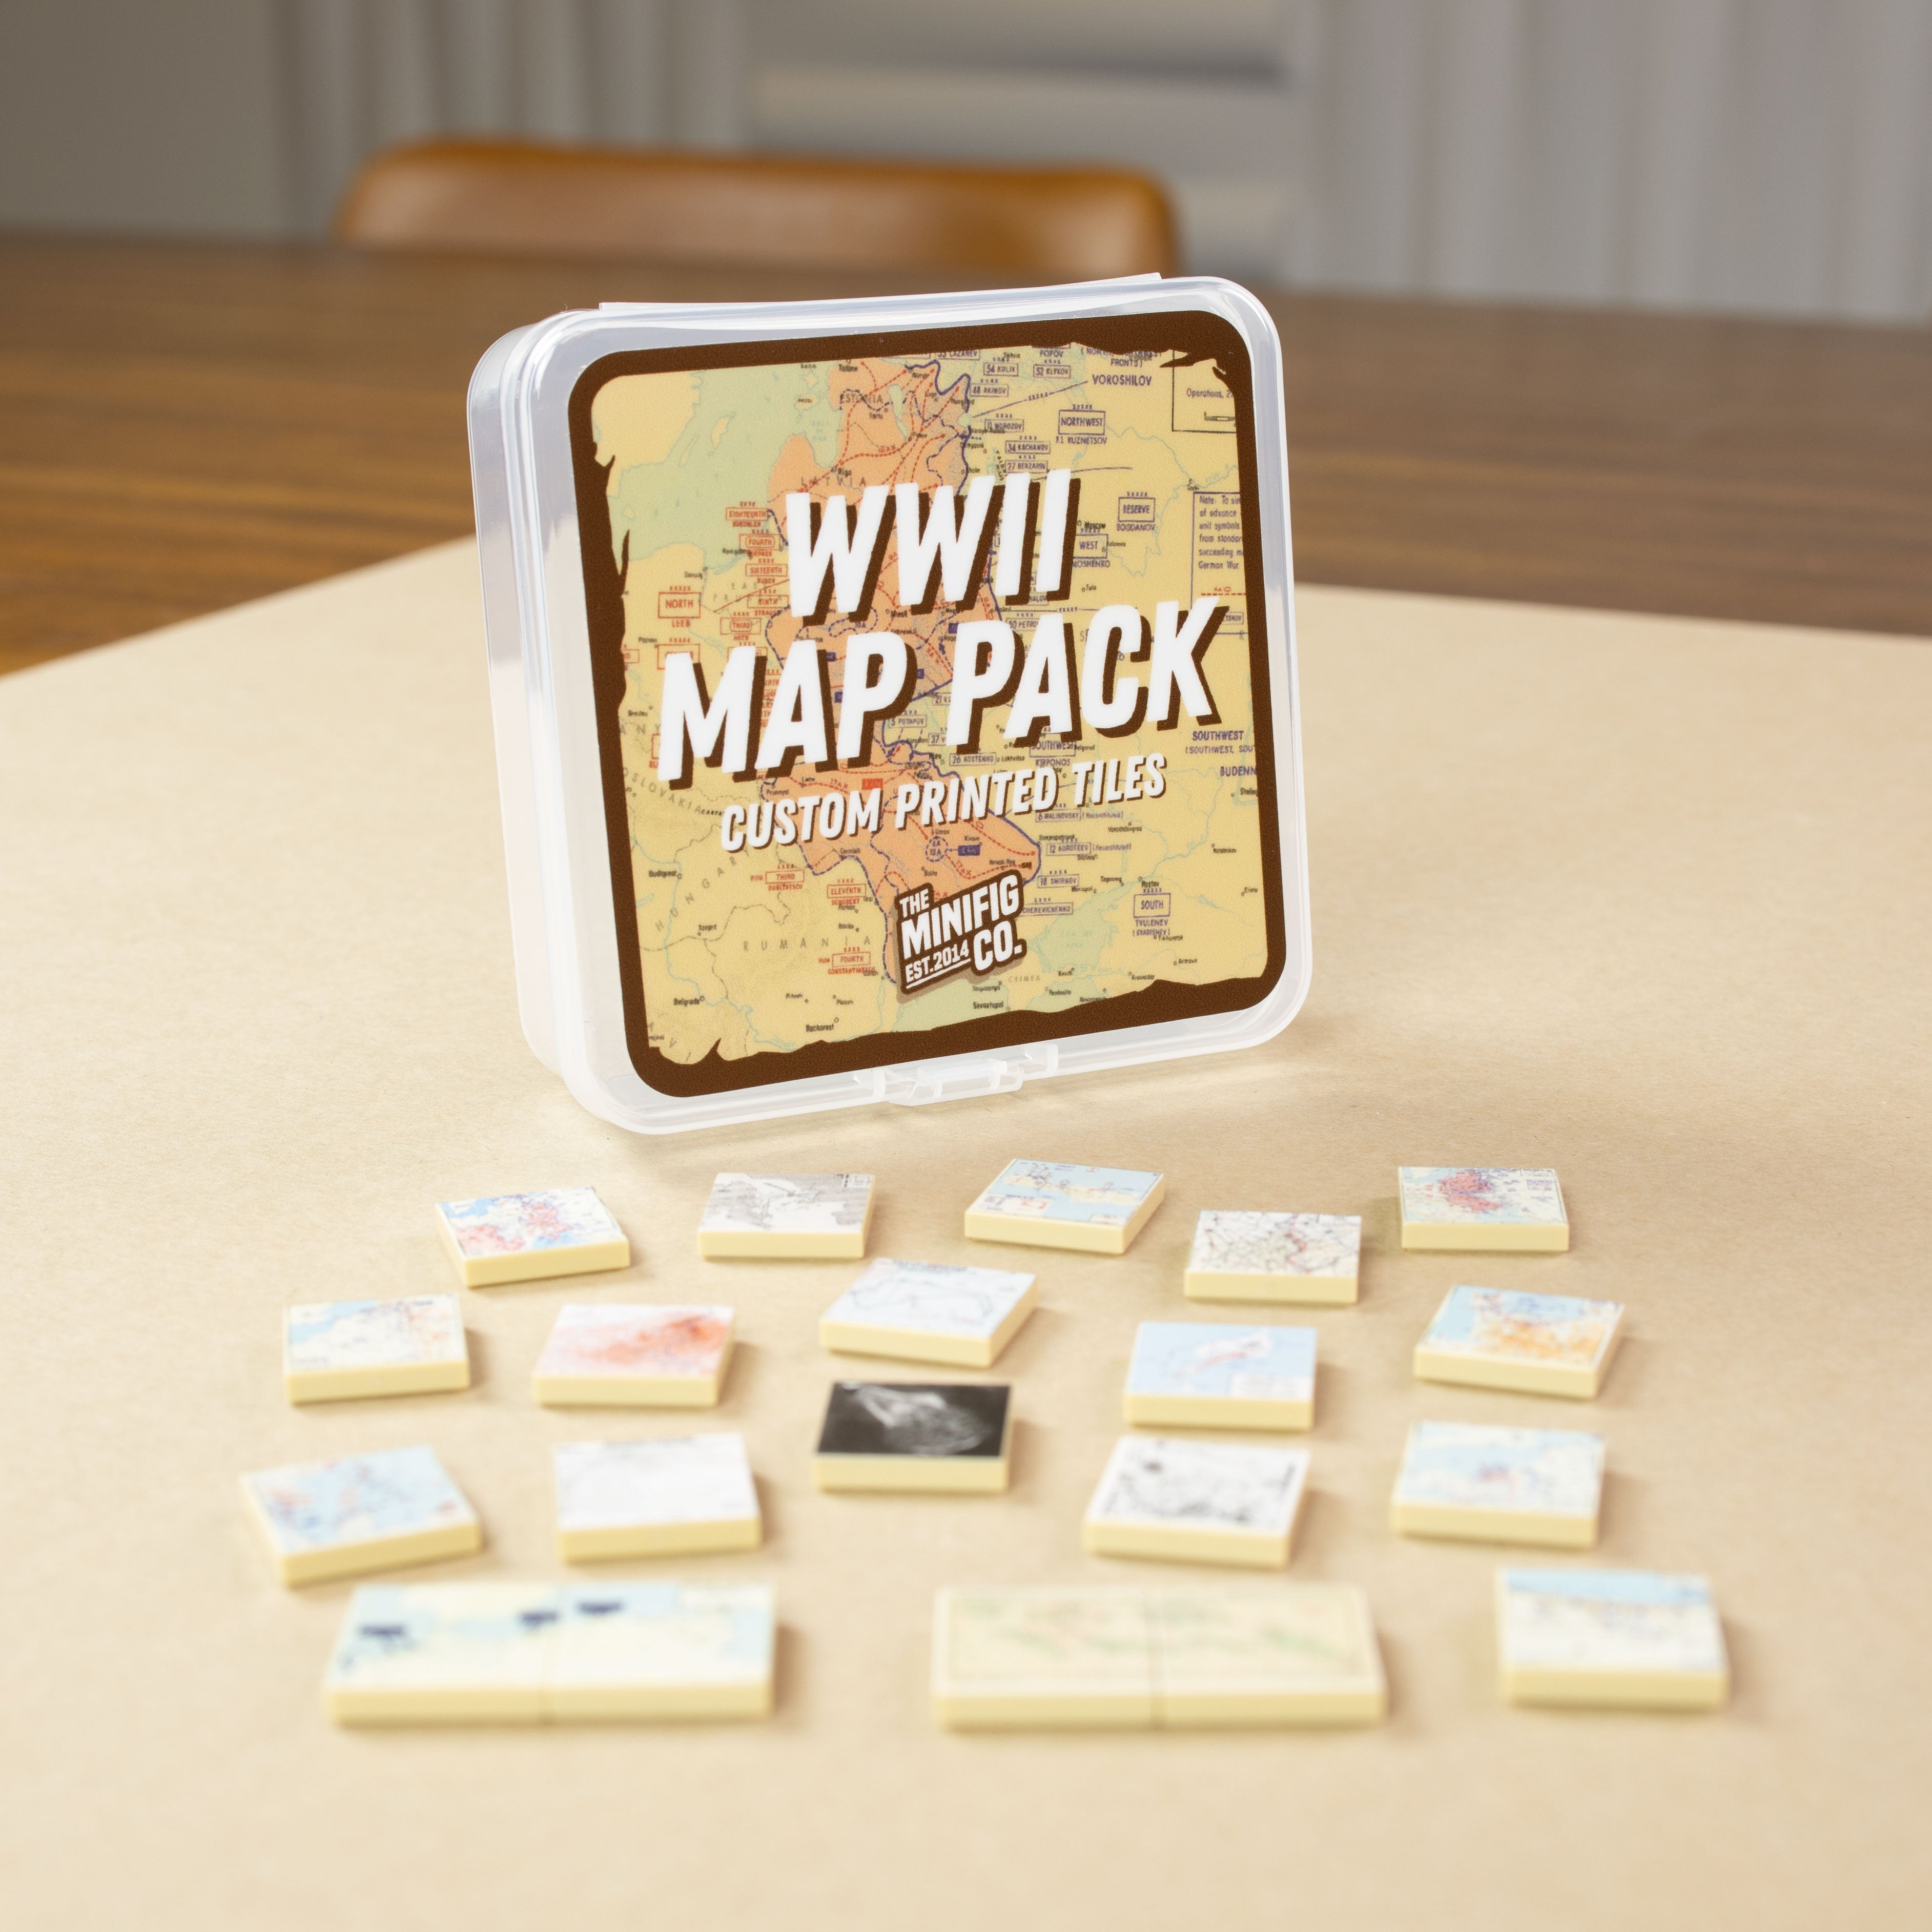 Custom Printed Lego - WWII Map Pack - The Minifig Co.